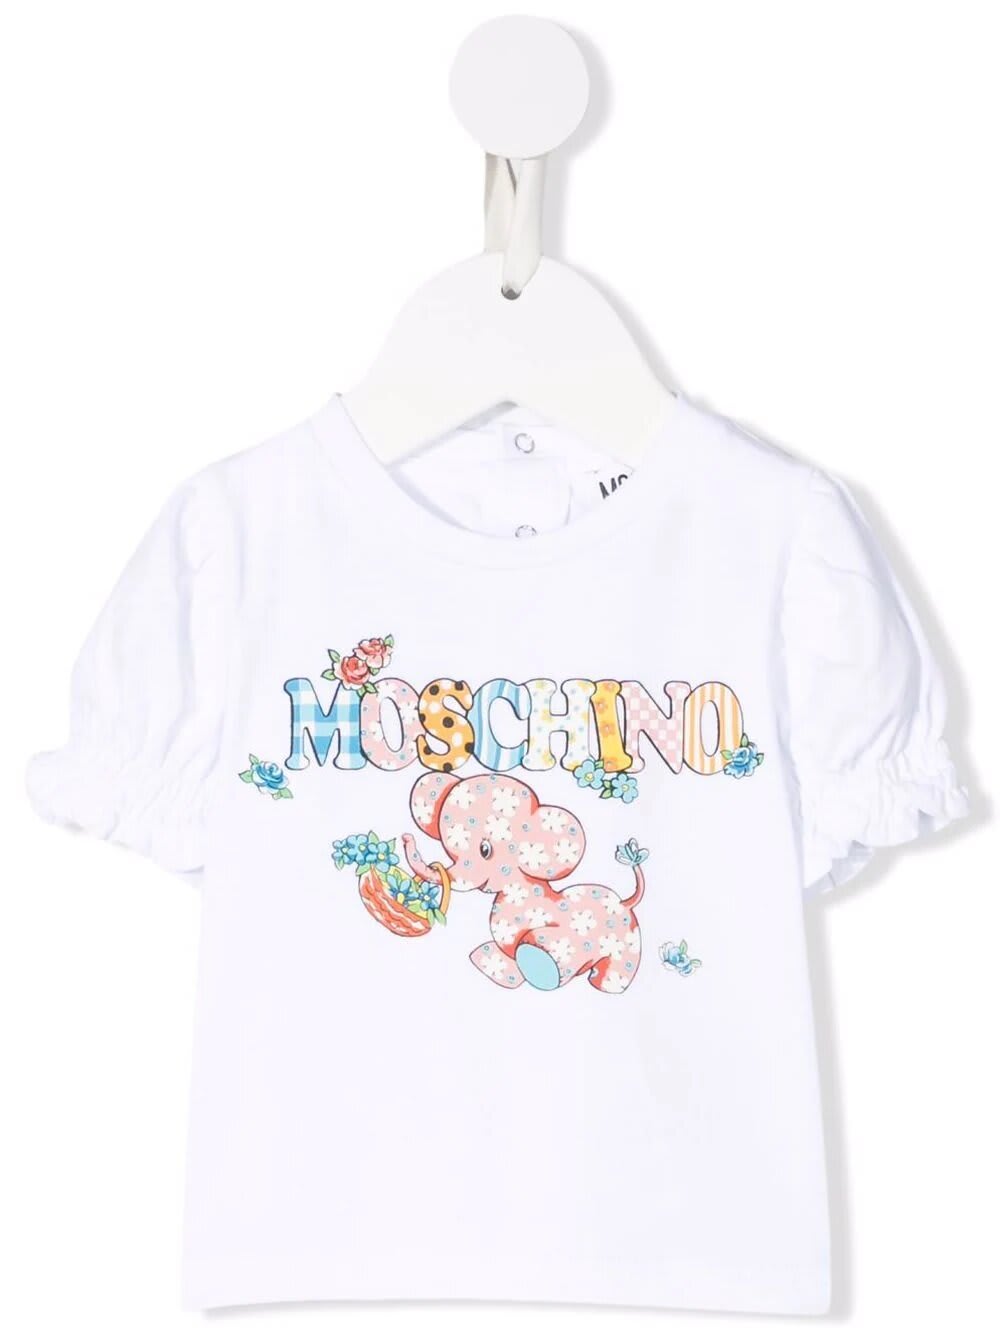 Moschino Baby White T-shirt With Calico Elephant Print